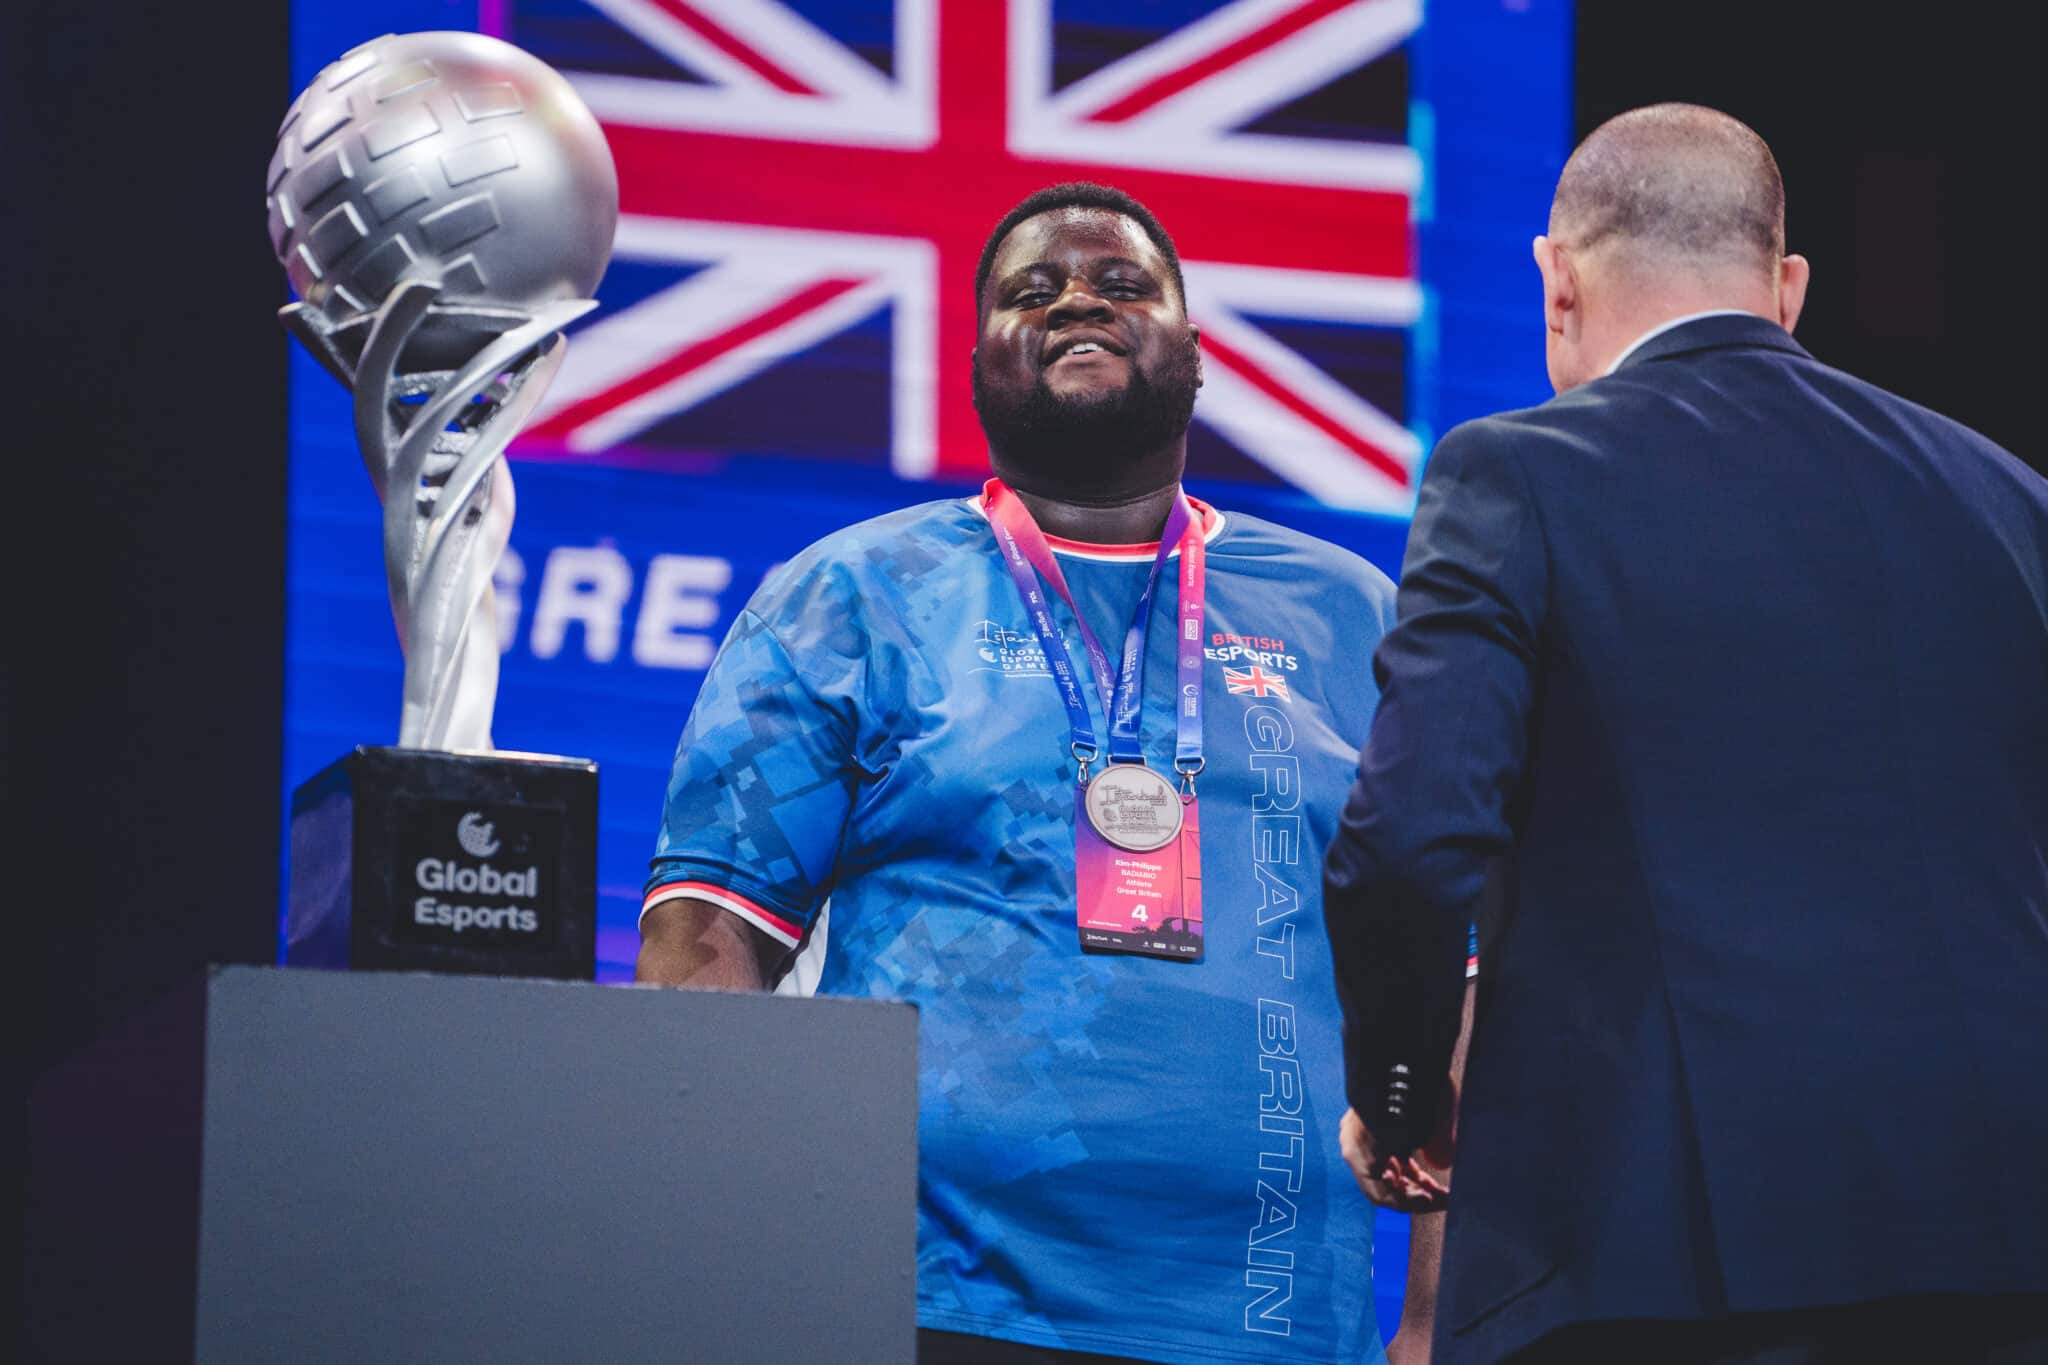 The4Philzz earns silver medal for Great Britain at Global Esports Games 2022